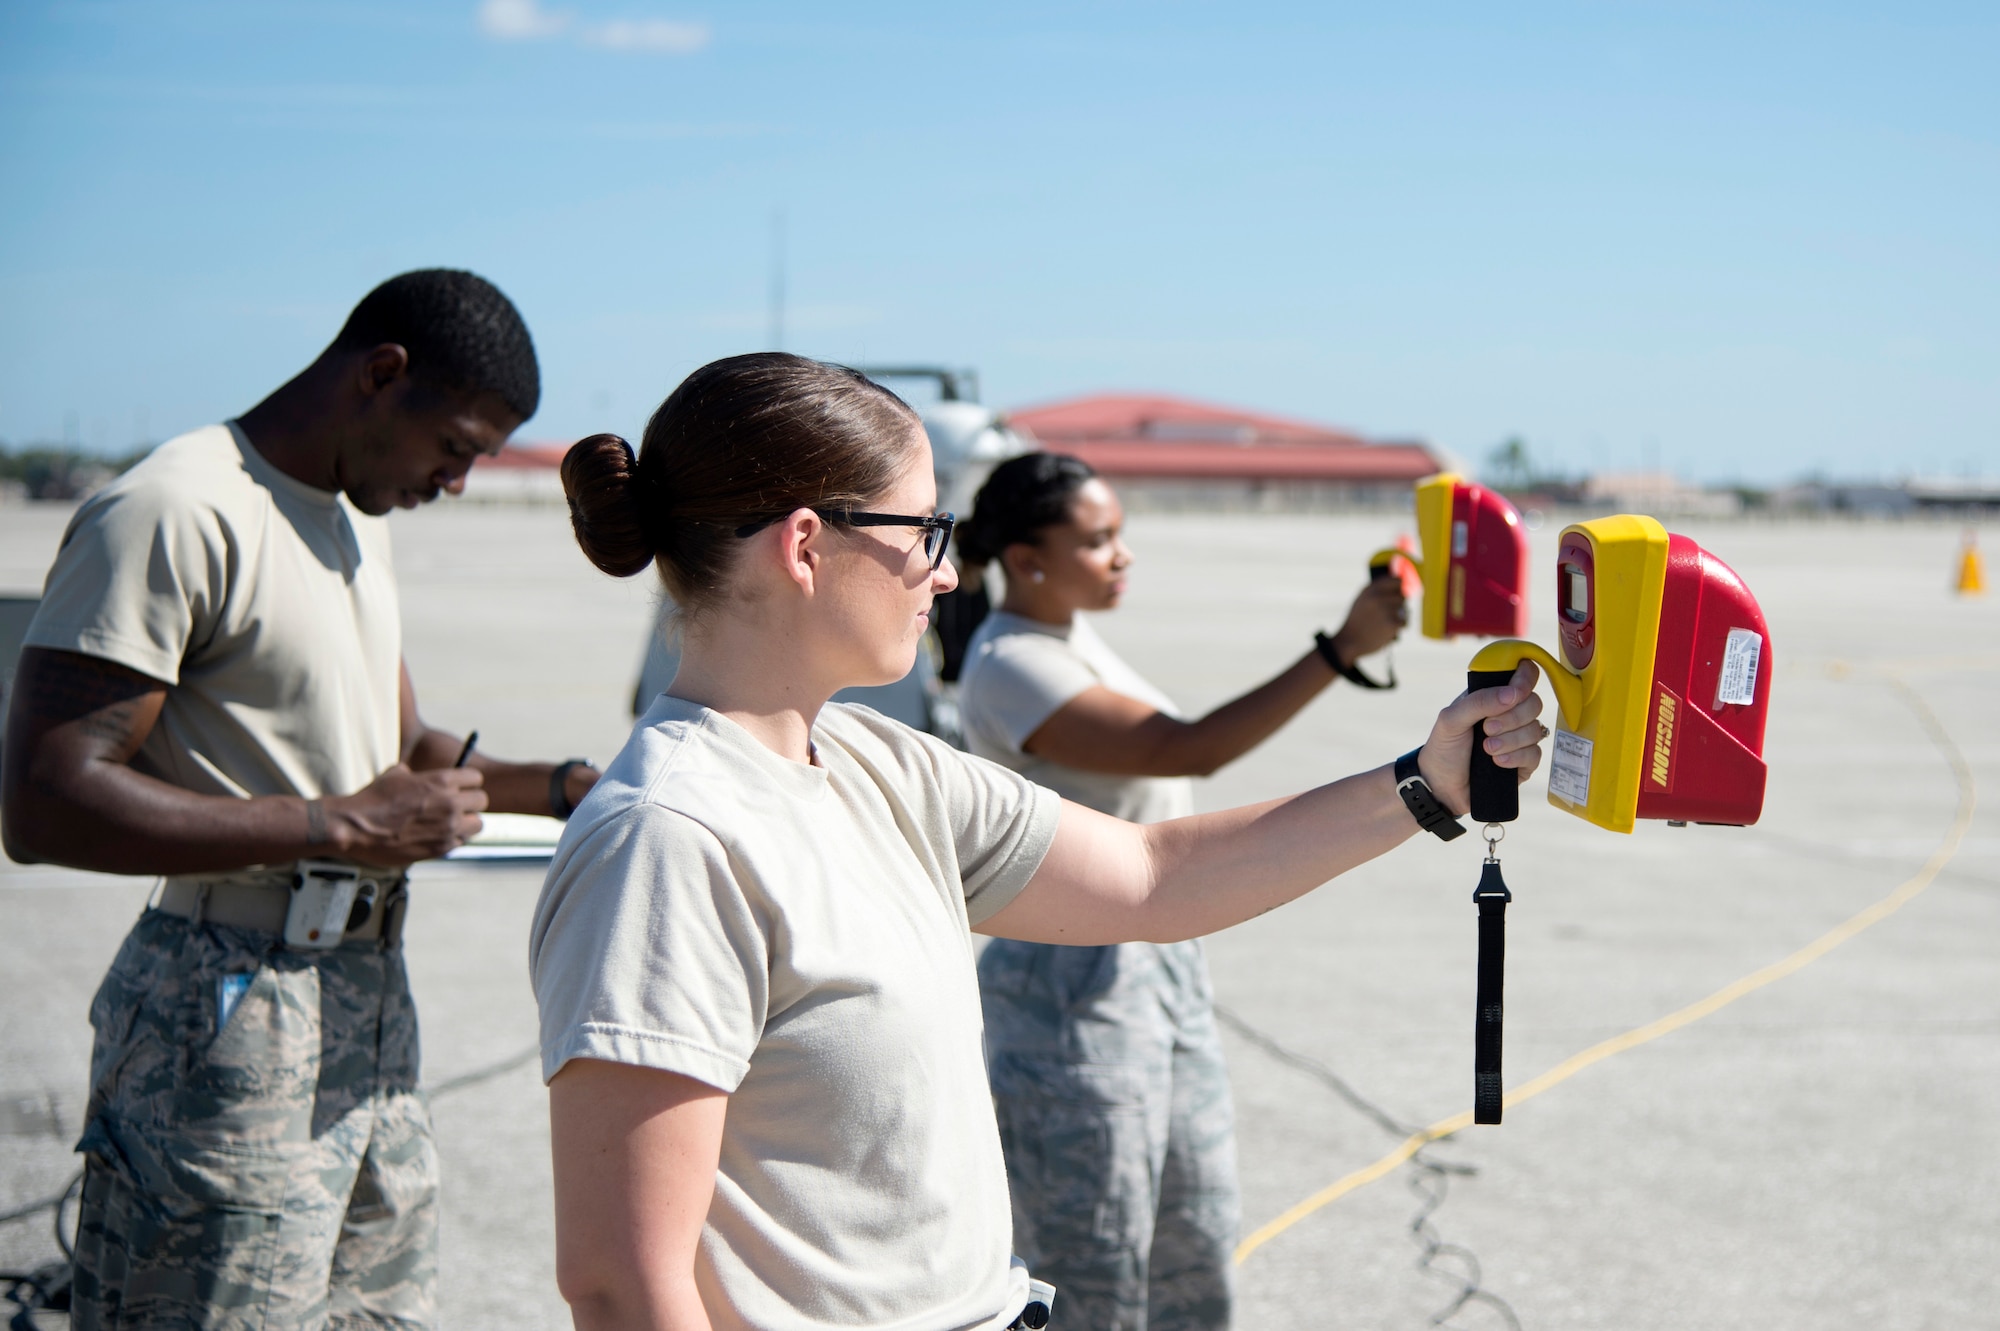 U.S. Air Force bioenvironmental engineering technicians assigned to the 6th Aerospace Medicine Squadron, perform a radiation scatter survey at MacDill Air Force Base, Fla., Nov. 7, 2017.